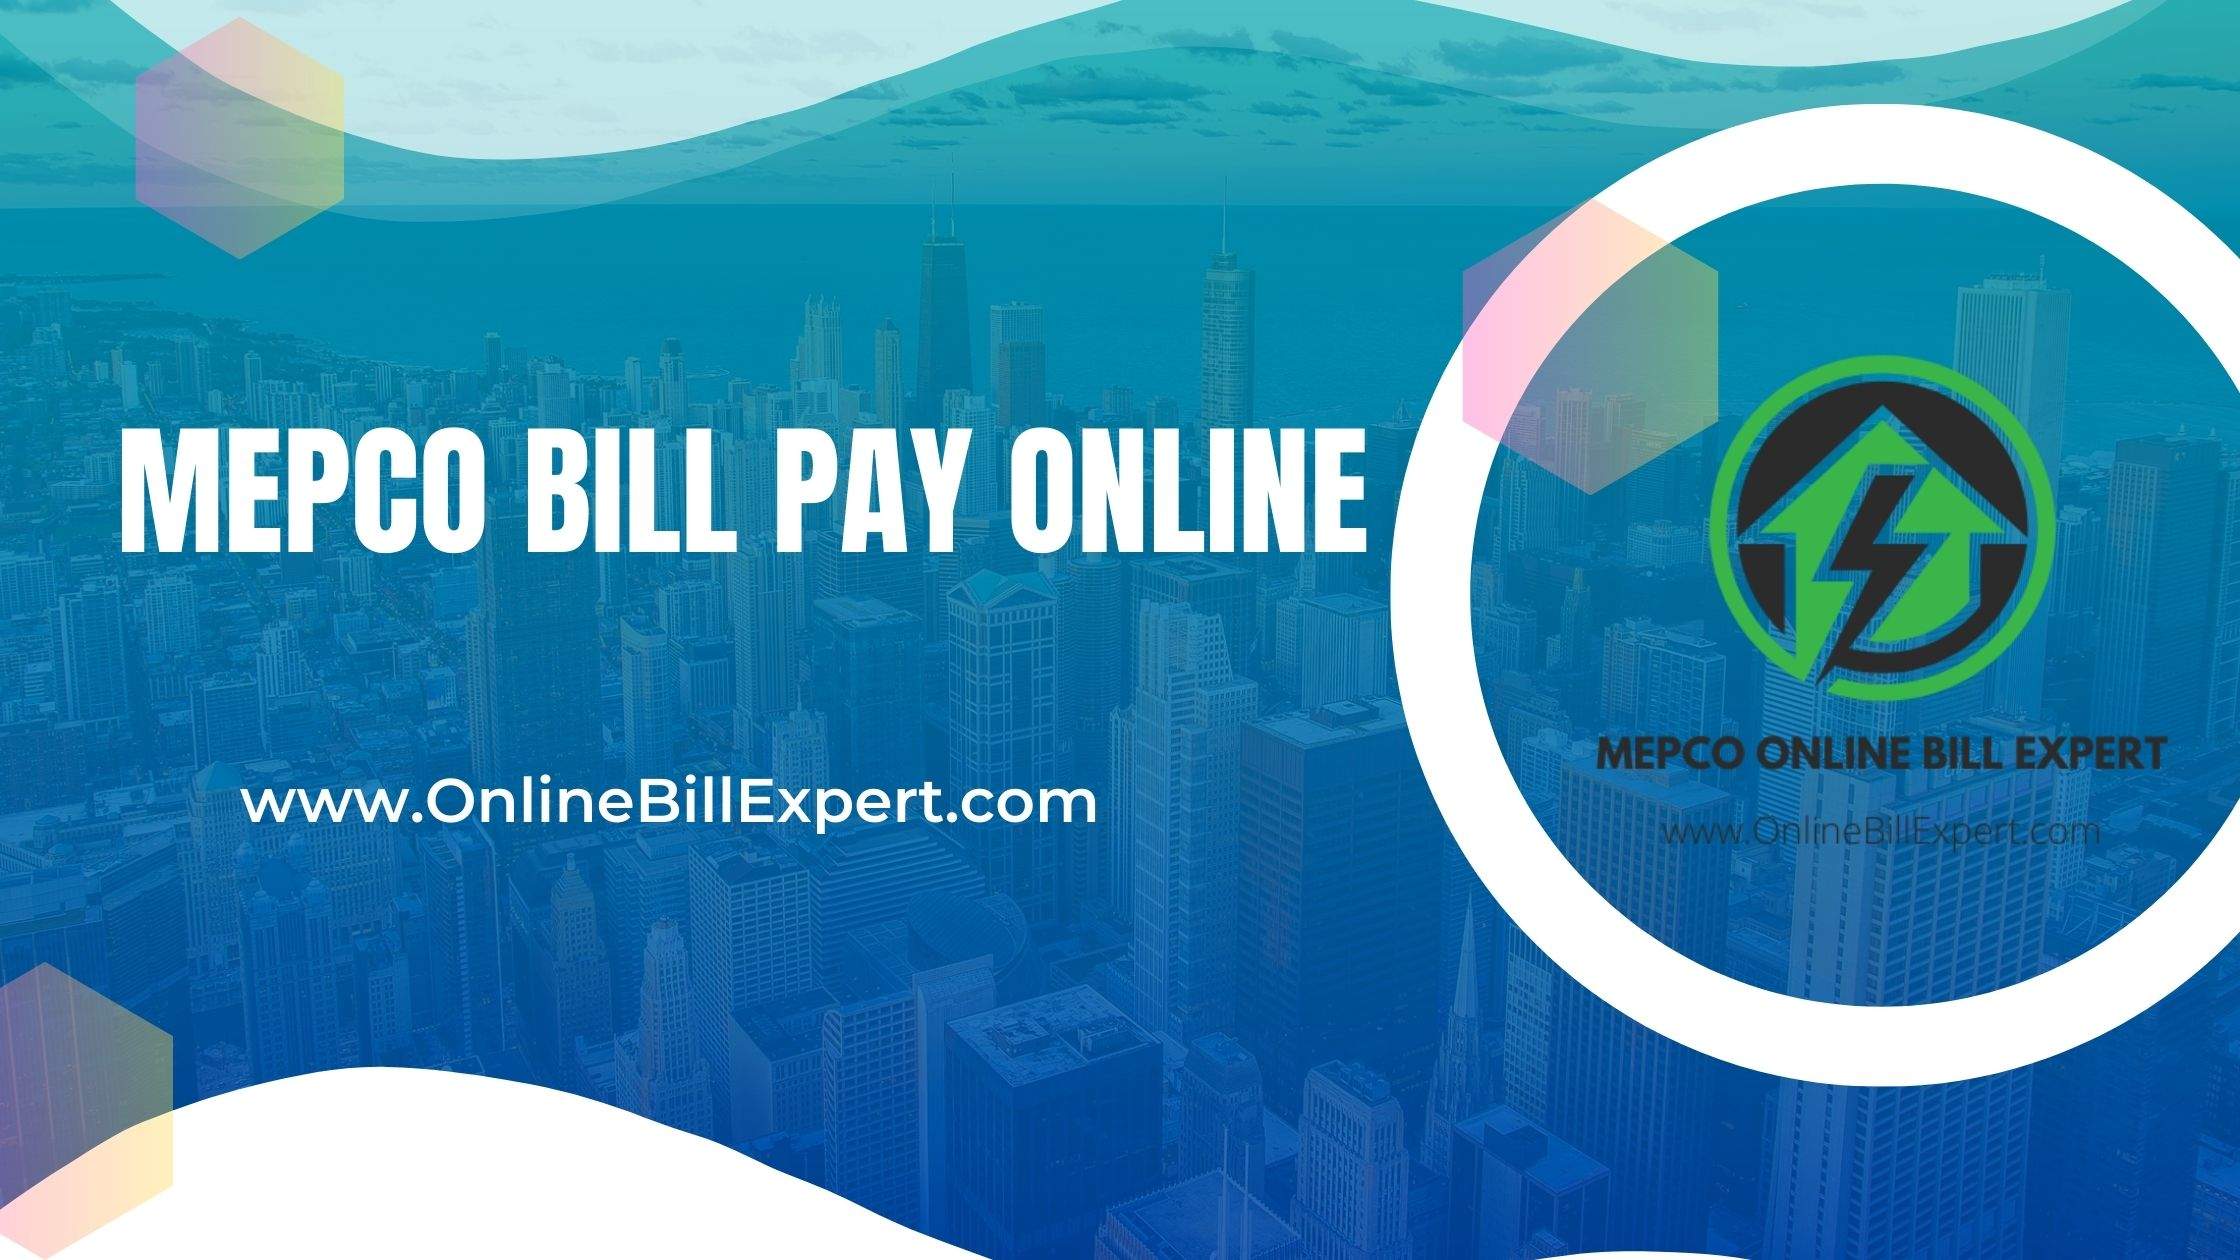 Mepco Bill Pay Online